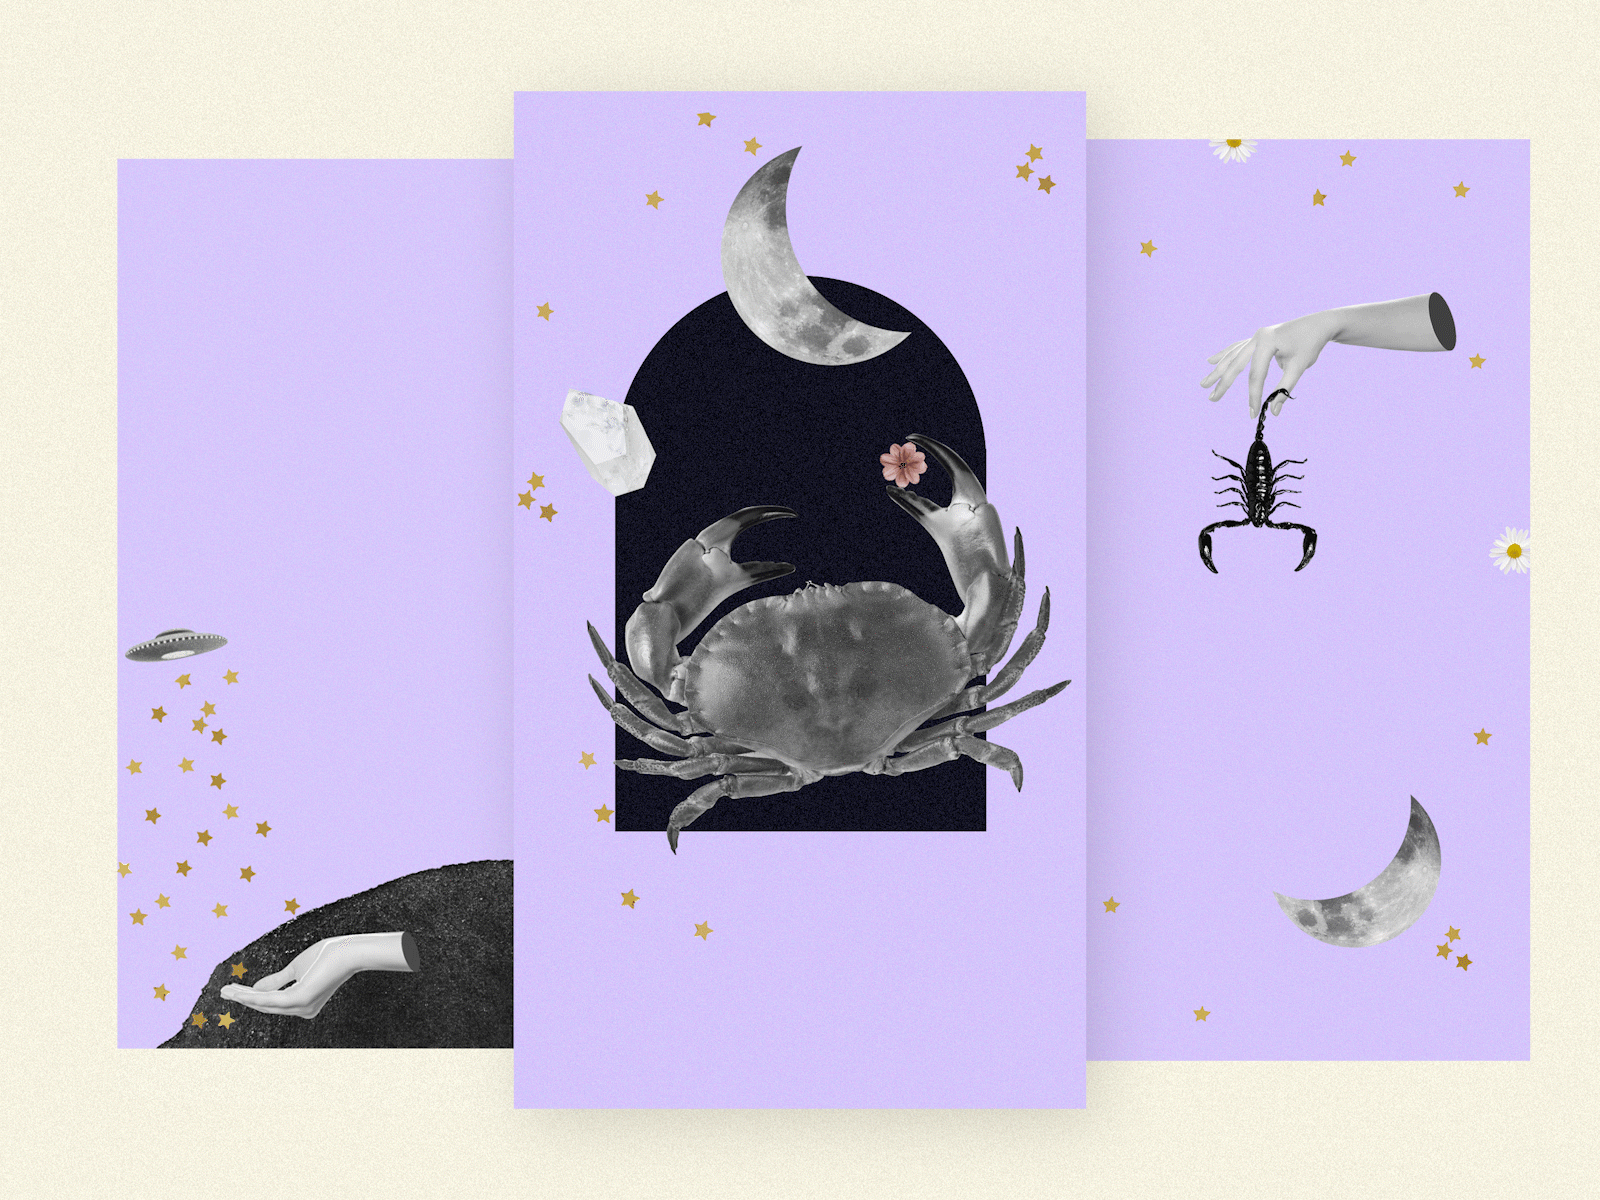 Horoscope collages